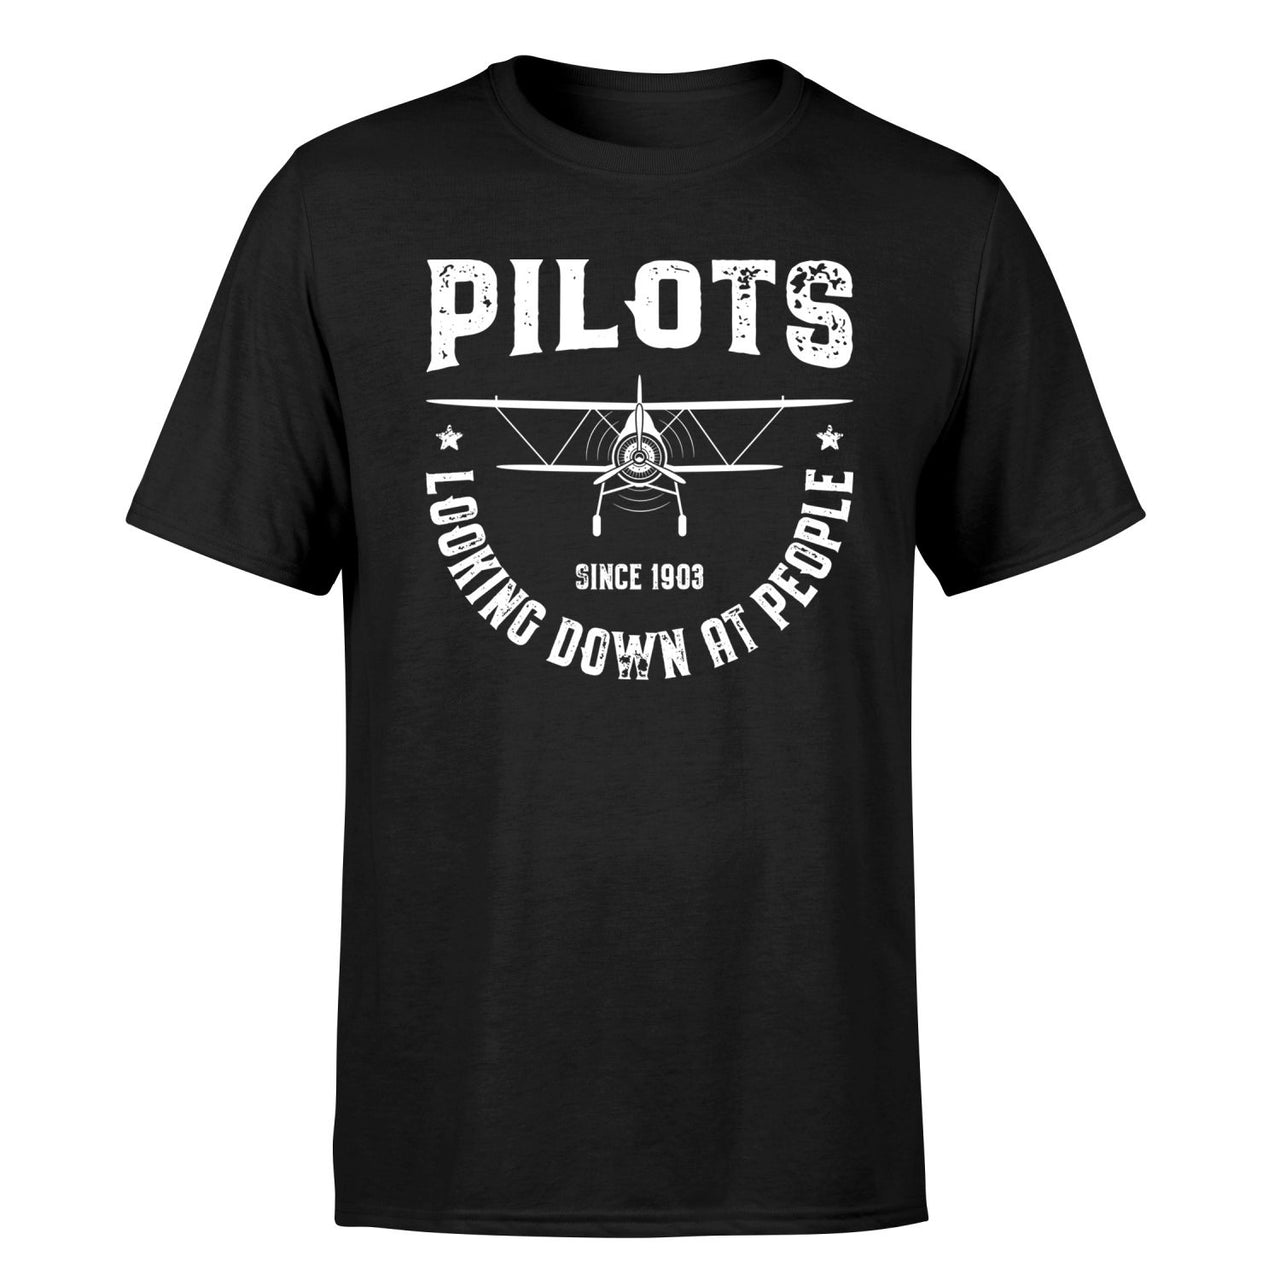 Pilots Looking Down at People Since 1903 Designed T-Shirts